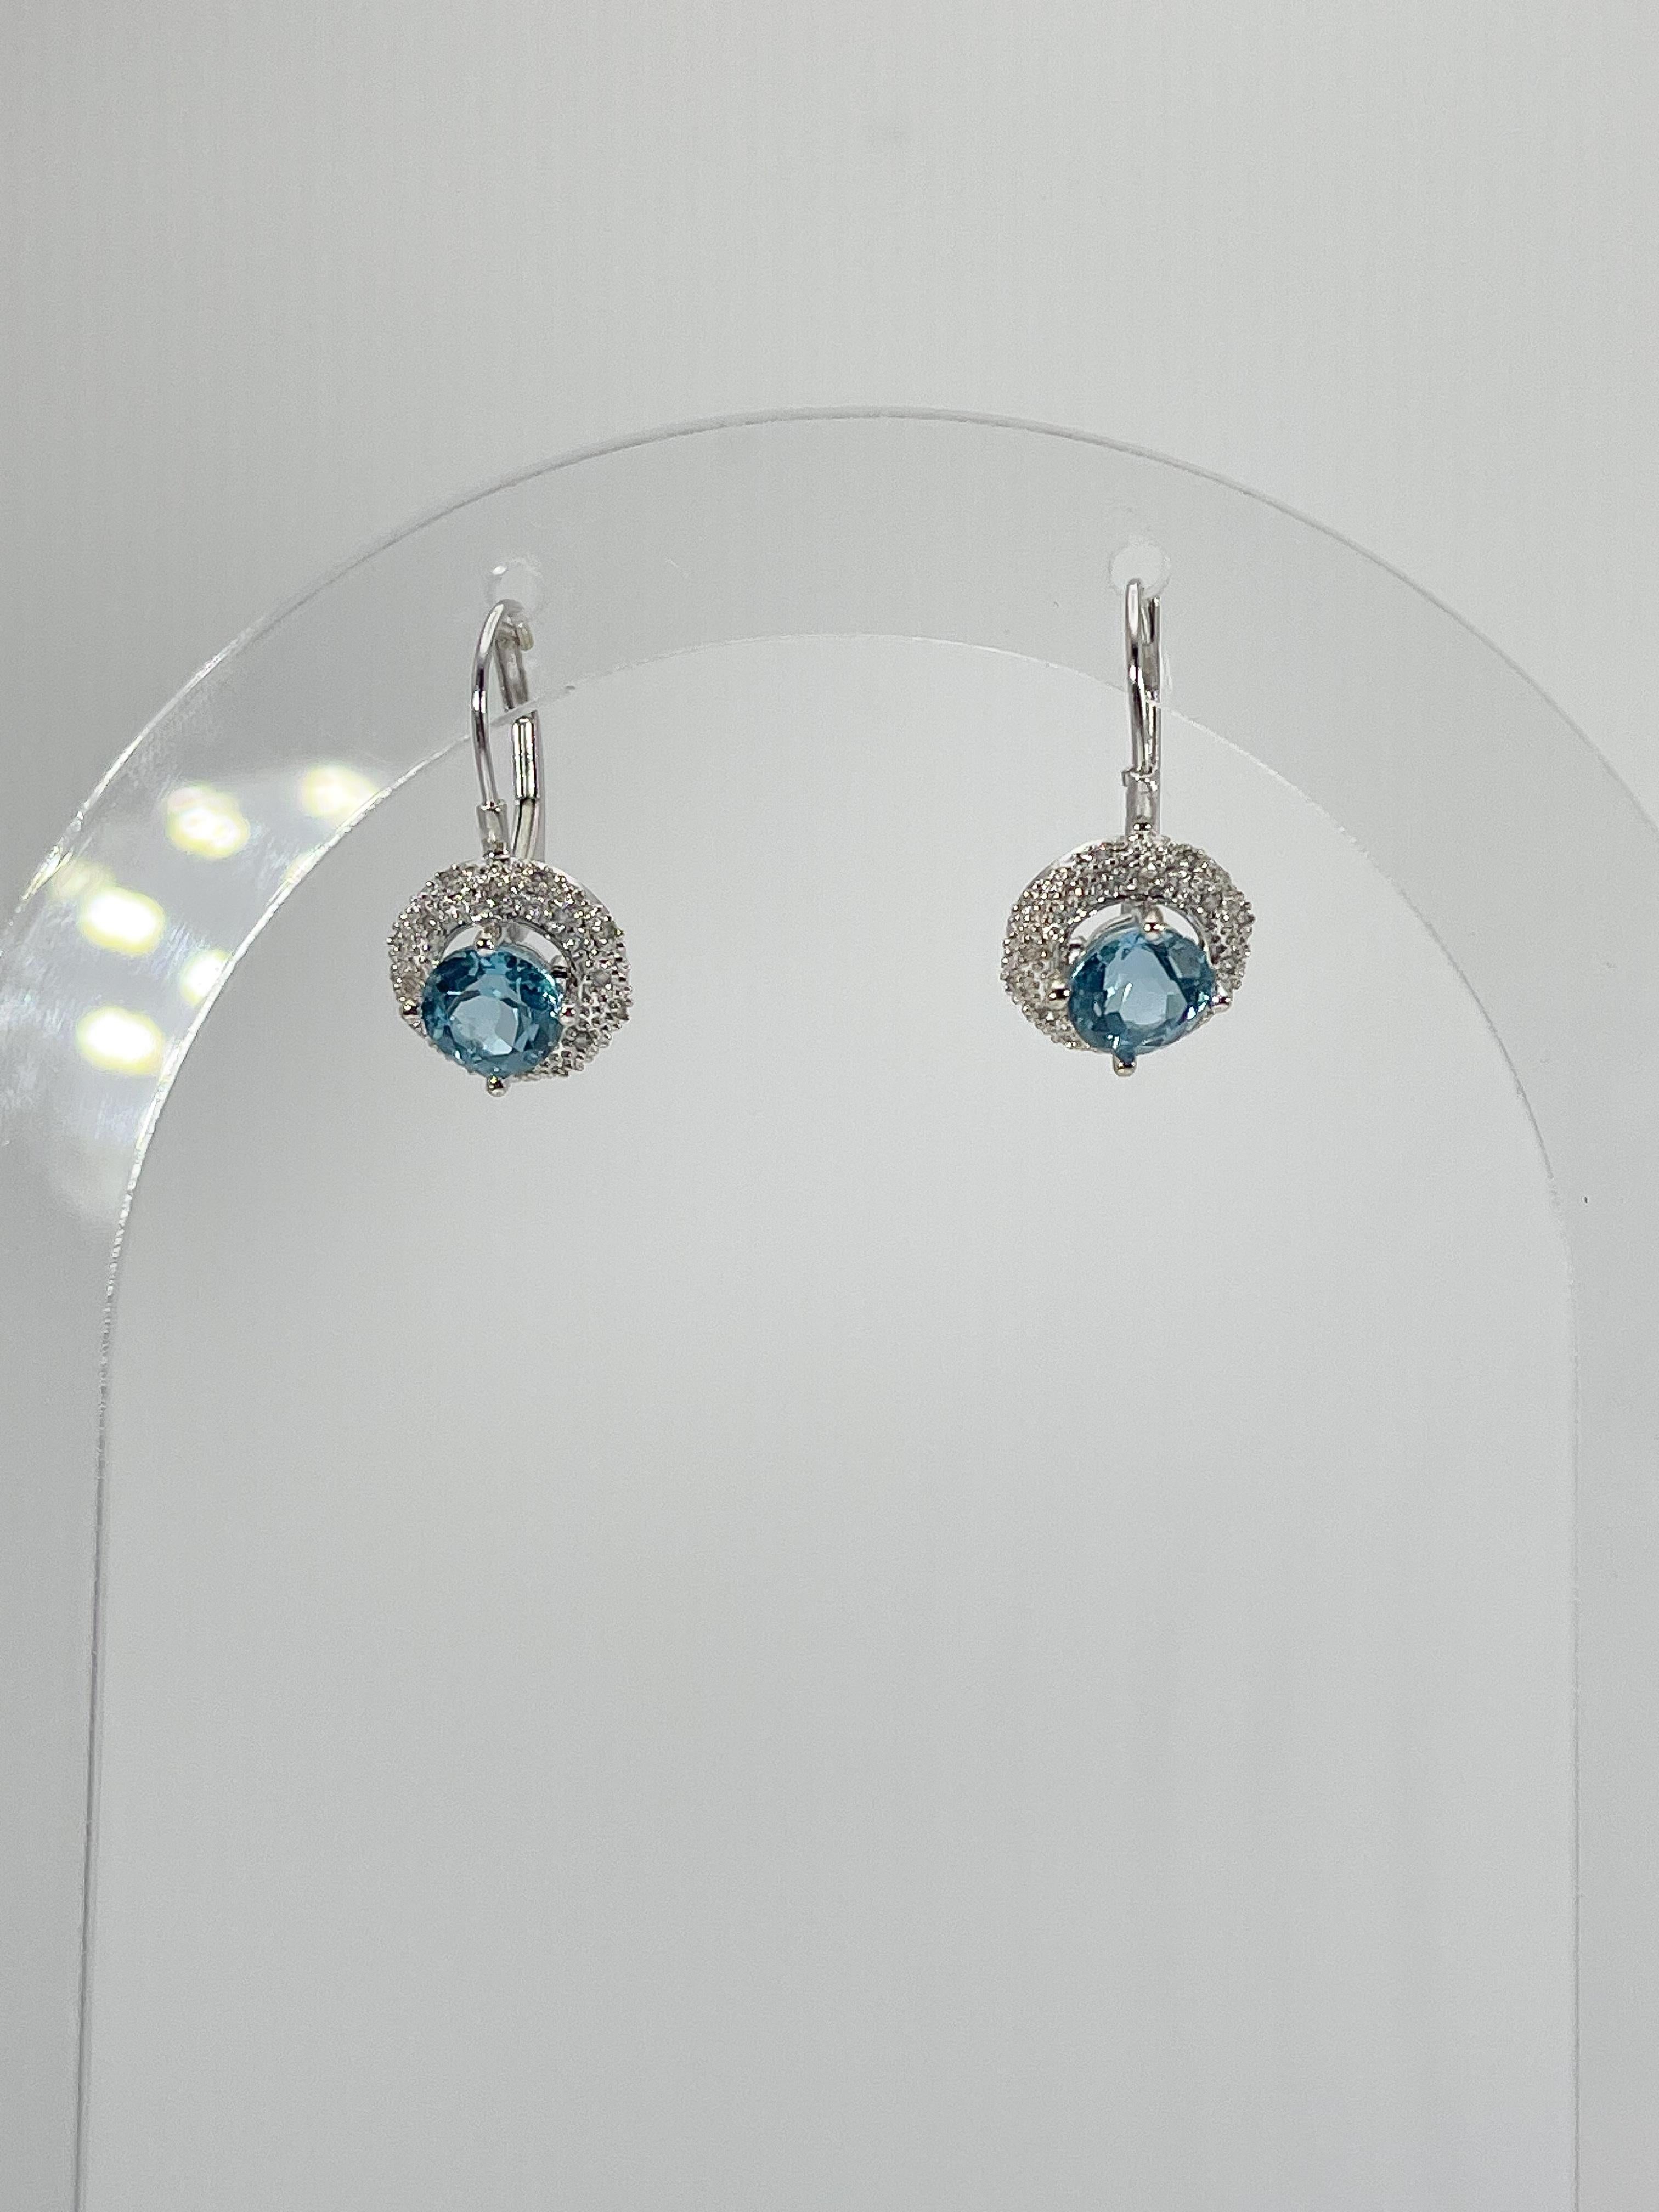 14k white gold round Swiss blue topaz earrings. These earrings have a lever back for easy wearing. The diameter of the design is 8.3 mm, the total weight of the earrings is 2.79 grams. 